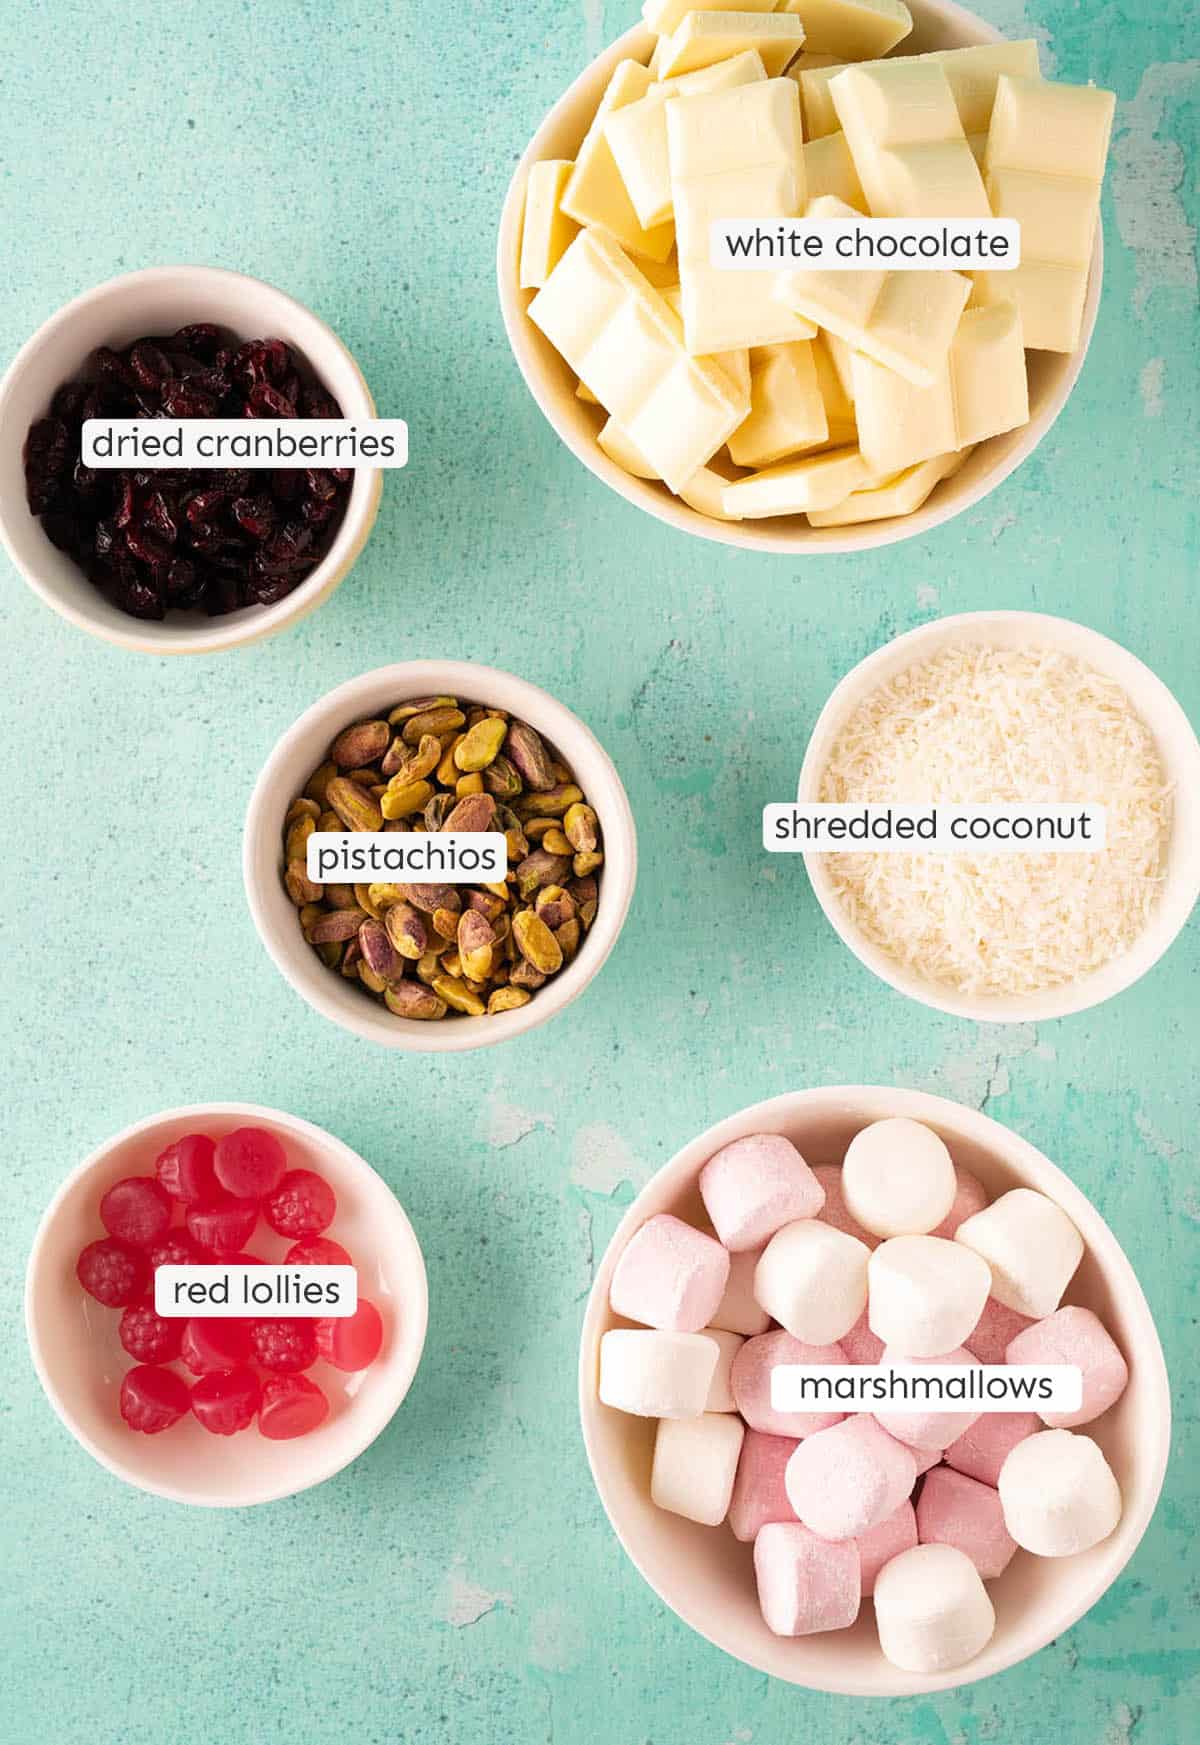 All the ingredients needed to make White Chocolate Rocky Road from scratch. 